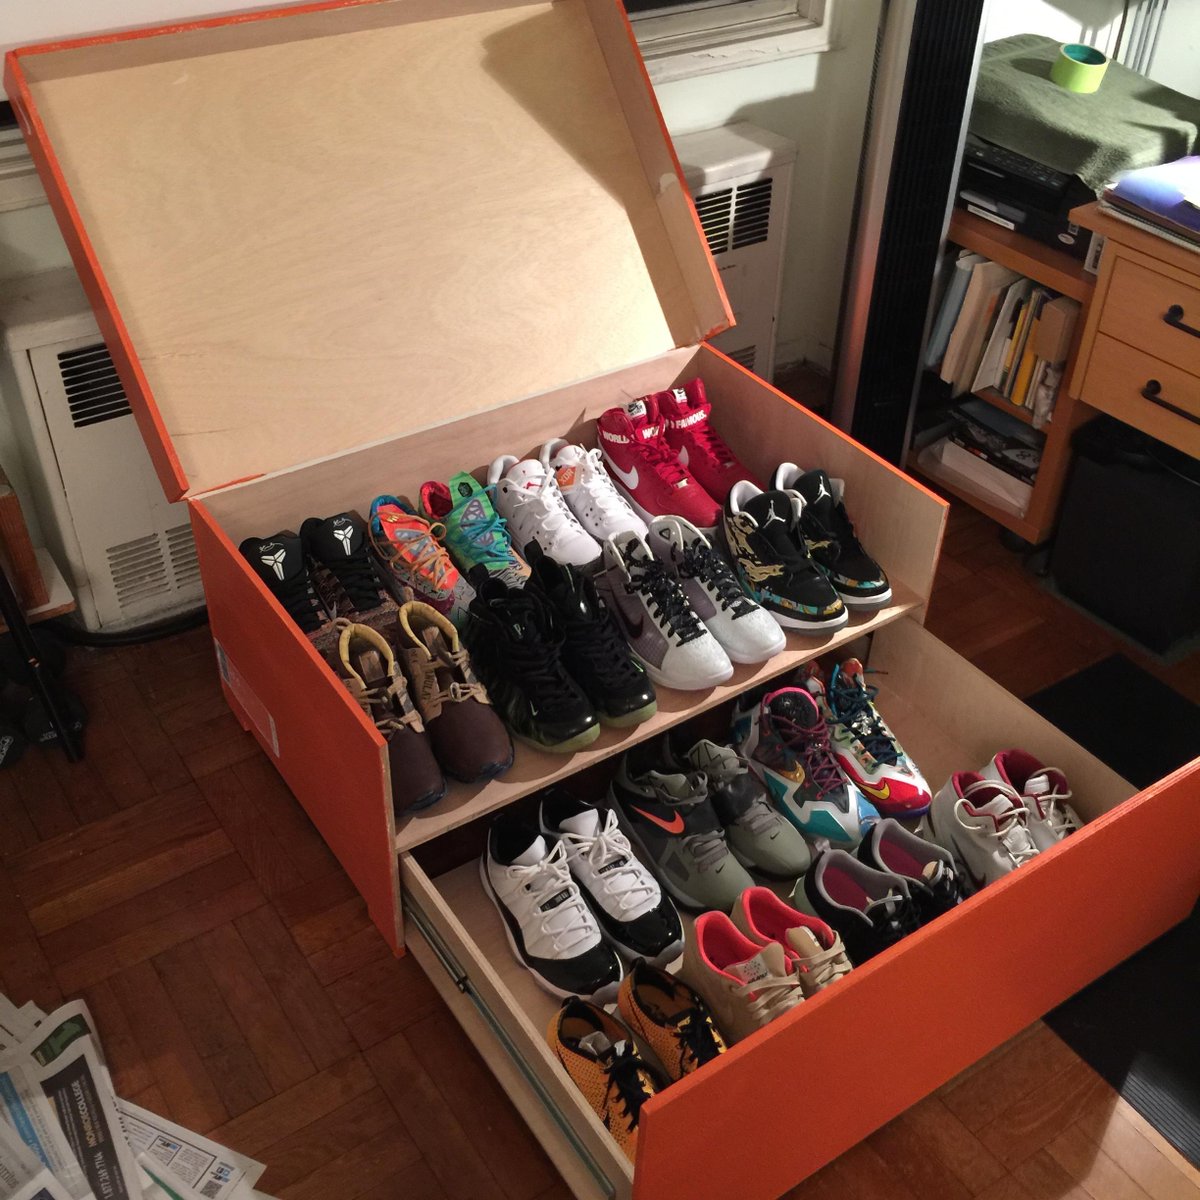 Complex Sneakers ar Twitter: "You'll want to store your sneakers in this  GIGANTIC Nike shoe box: http://t.co/GDOTYNtAia http://t.co/hTIu06zpTF" /  Twitter